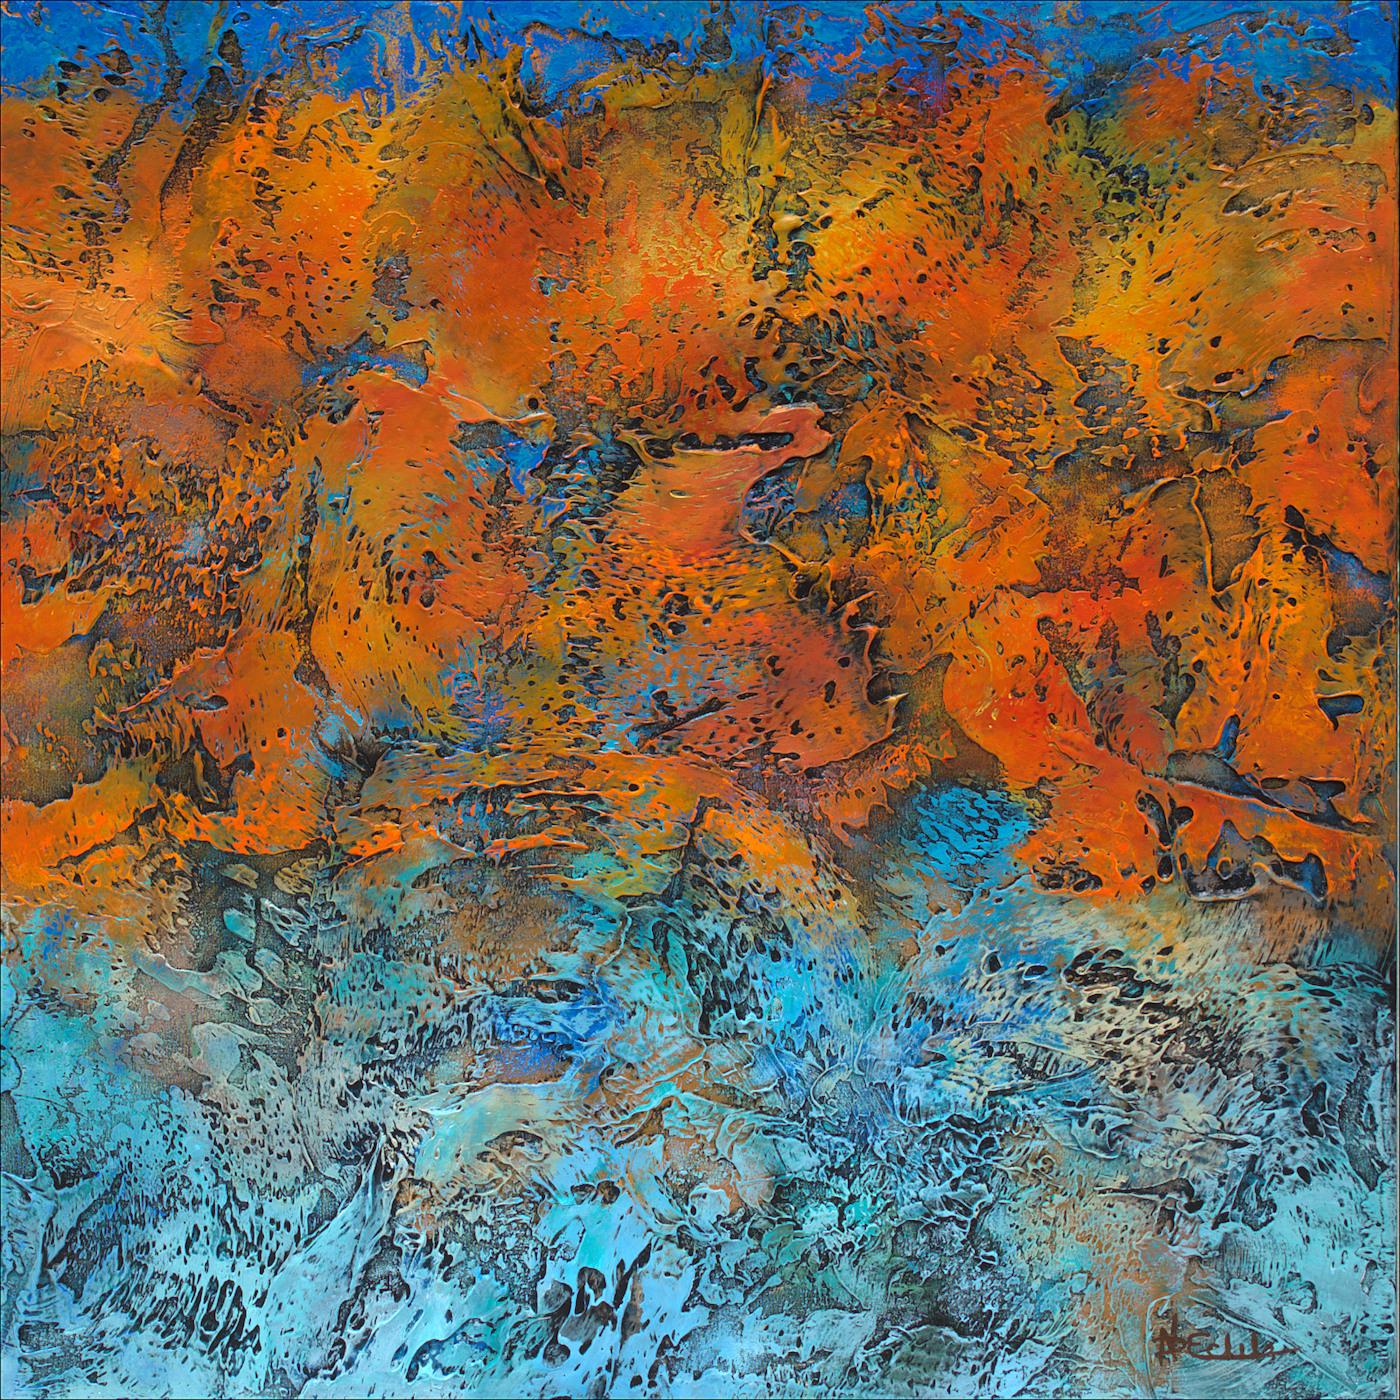 Nancy Eckels Abstract Painting - "Transition To Winter" Mixed Media abstract with textural blues, orange, aqua